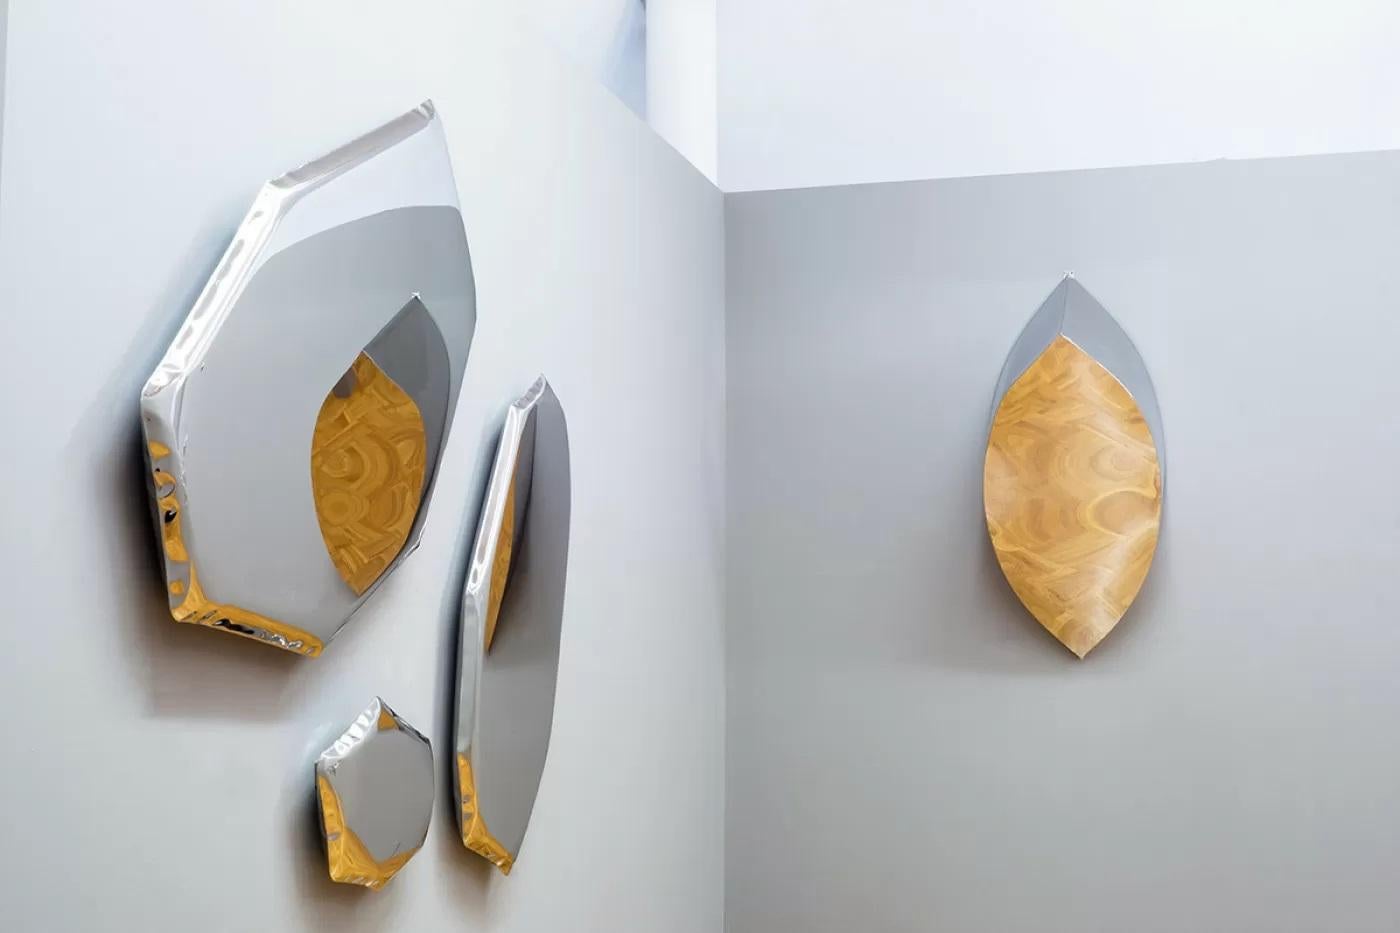 Large leska stainless steel wall mirror by Zieta
Dimensions: D 61 x W 58 x H 121 cm 
Material: Mirror, stainless steel.
Finish: Polished.
Also available in small size.

A minimalist and delicate object alluding to the shape known as vesica